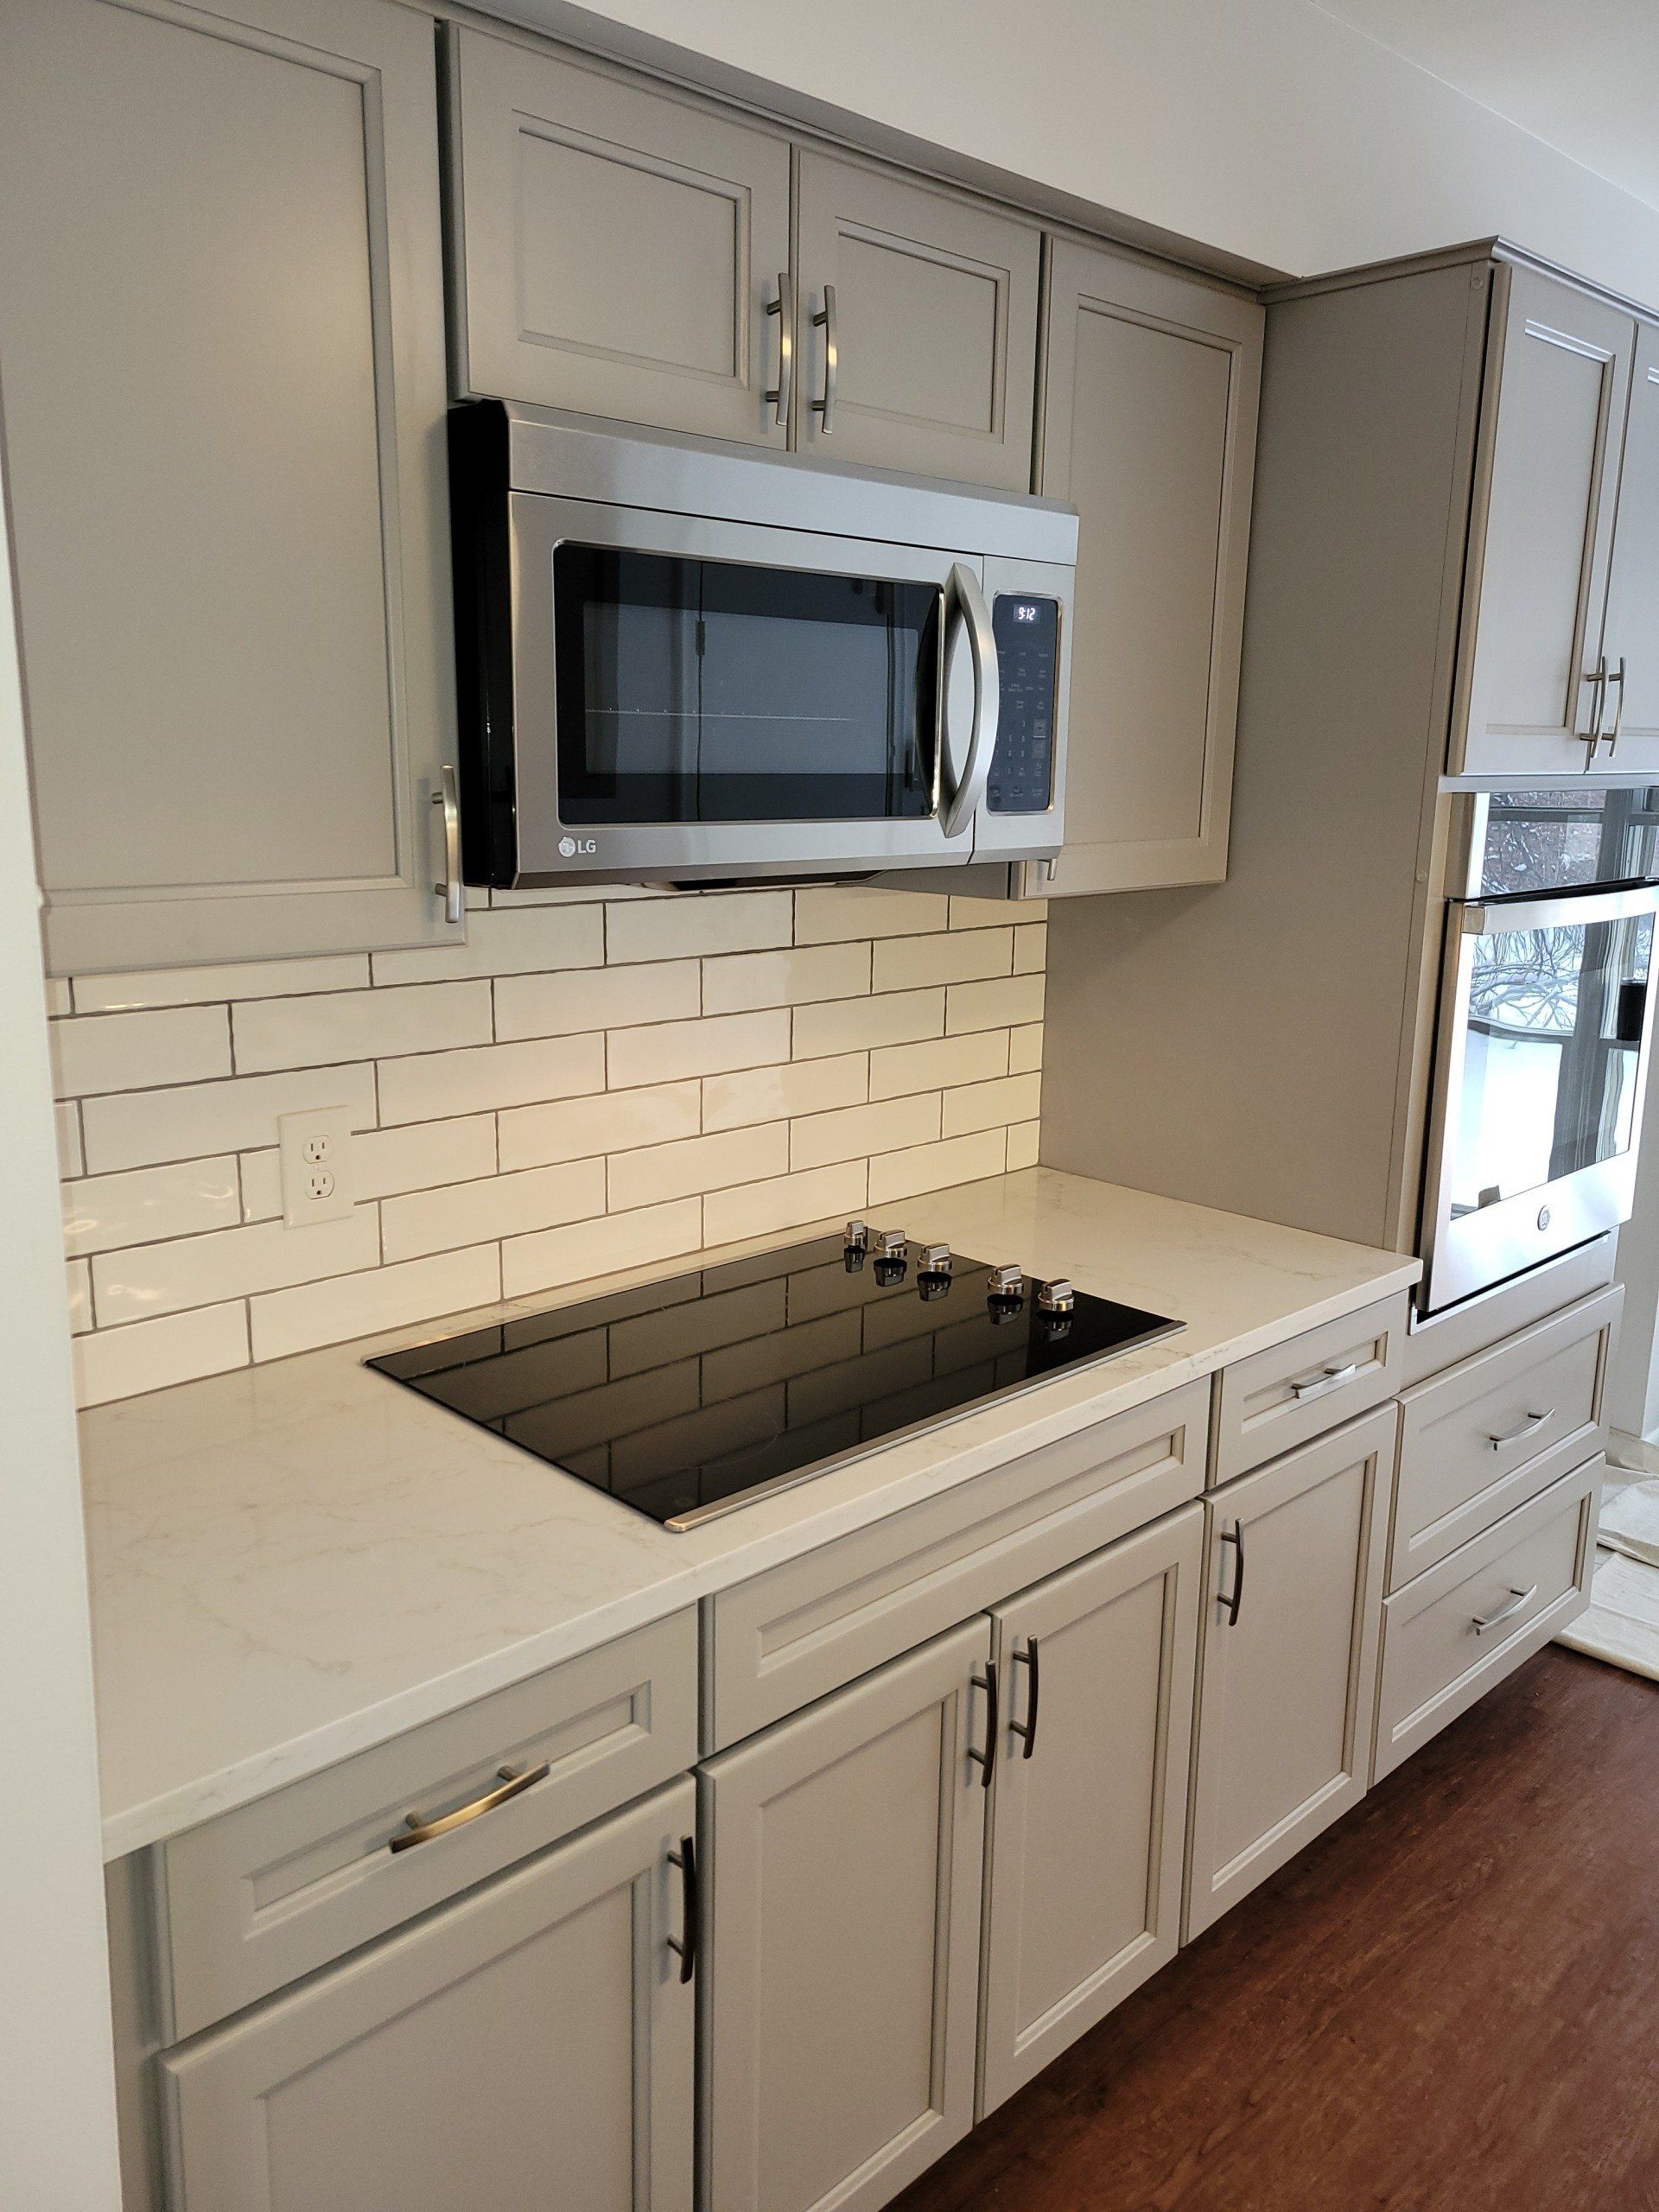 Professional Kitchen Remodel Contractor Near You